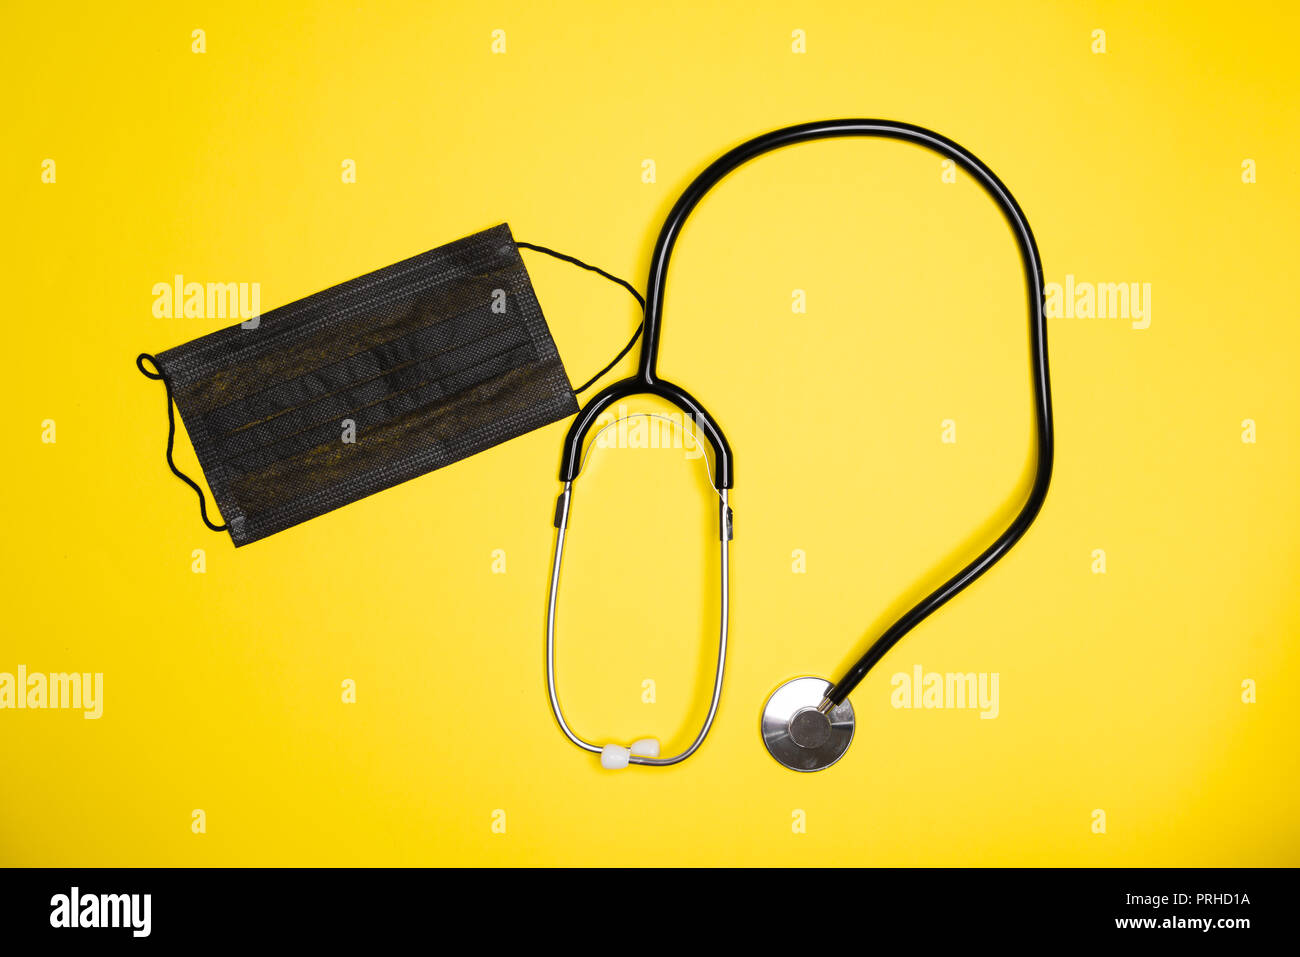 Medical wearable black sterile face mask with stethoscope. Concept clinic tools theme Stock Photo